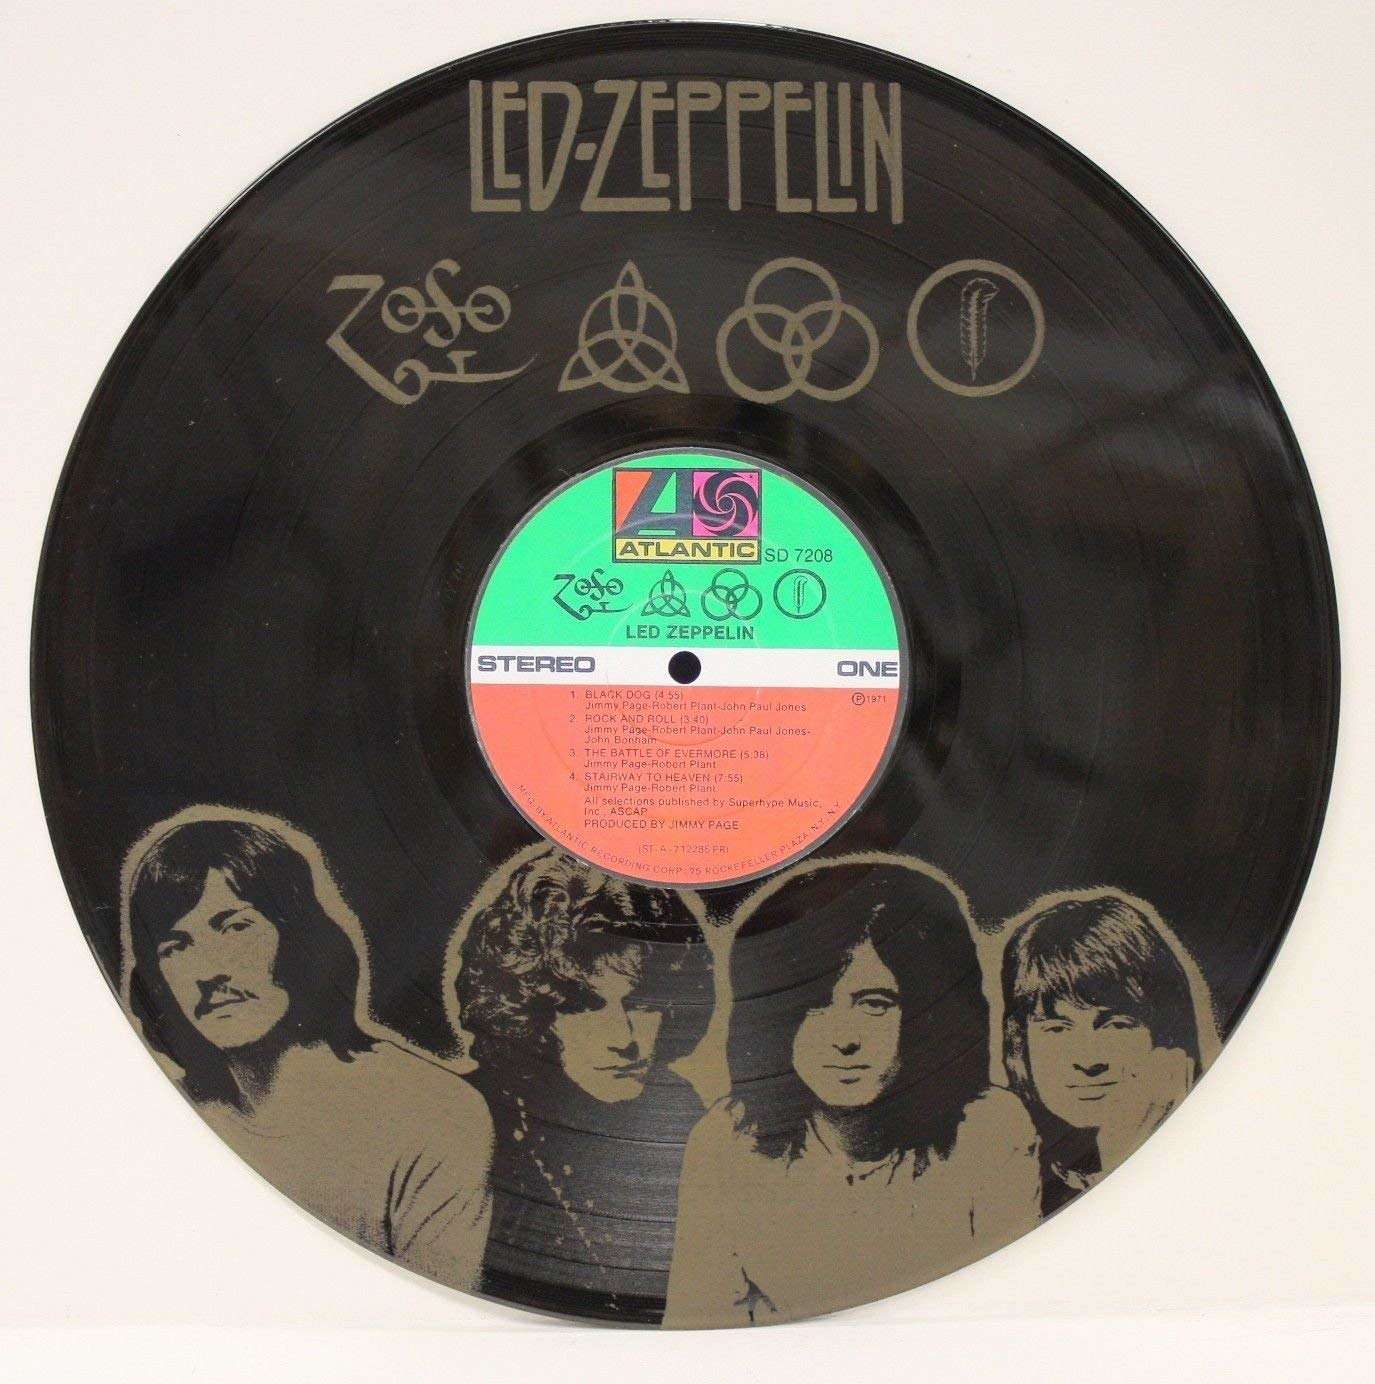 At risk Contest fragrance LED ZEPPELIN BLACK VINYL LP ETCHED W/ ARTIST'S IMAGE LIMITED EDITION - Gold  Record Outlet Album and Disc Collectible Memorabilia